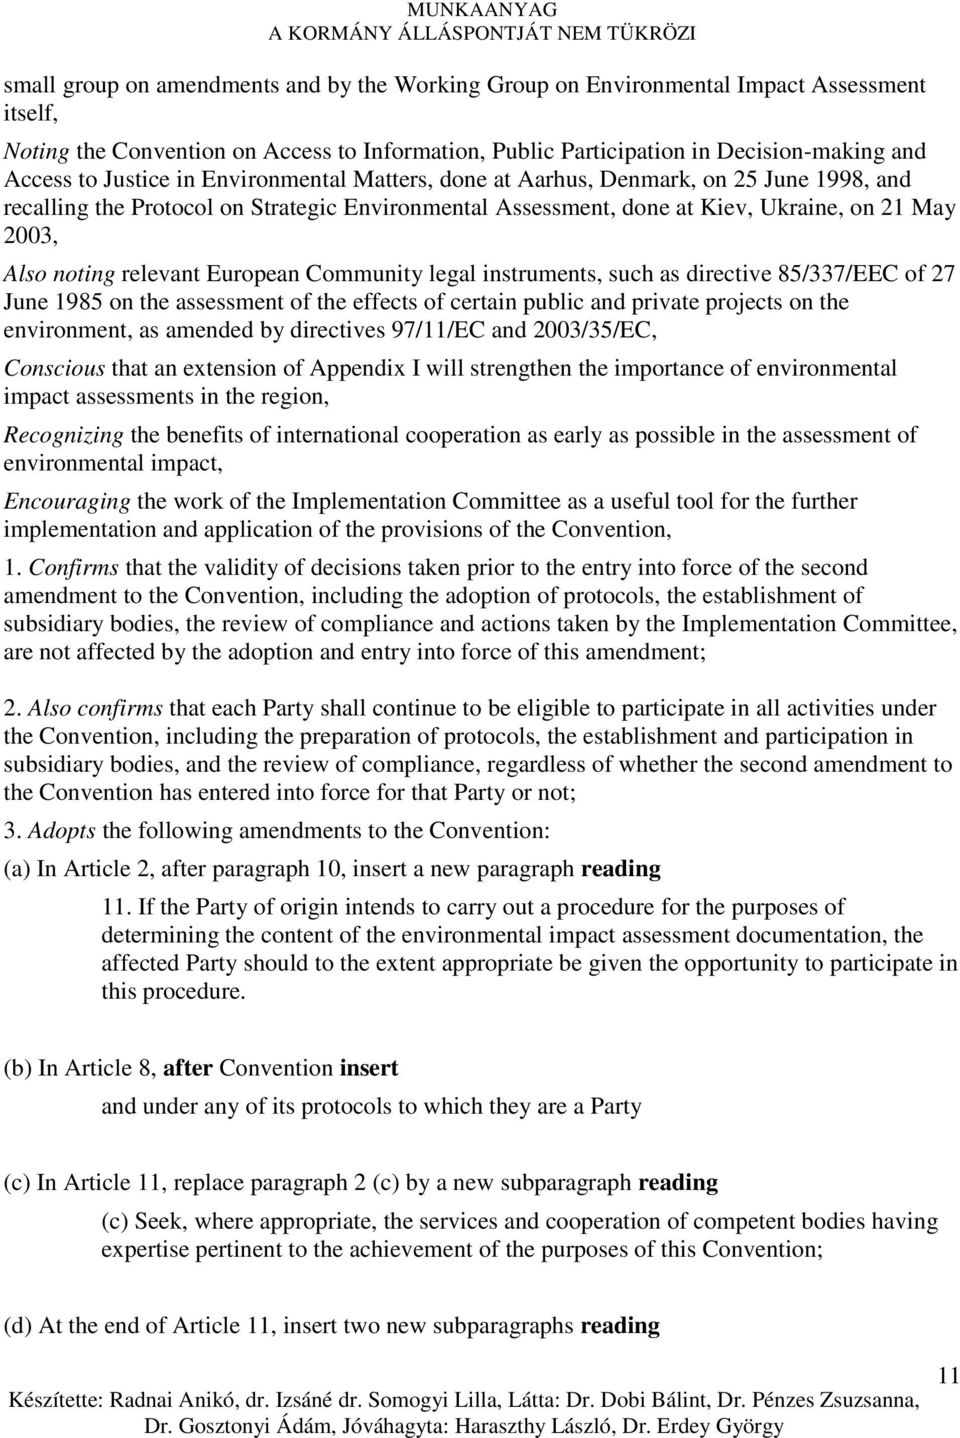 relevant European Community legal instruments, such as directive 85/337/EEC of 27 June 1985 on the assessment of the effects of certain public and private projects on the environment, as amended by